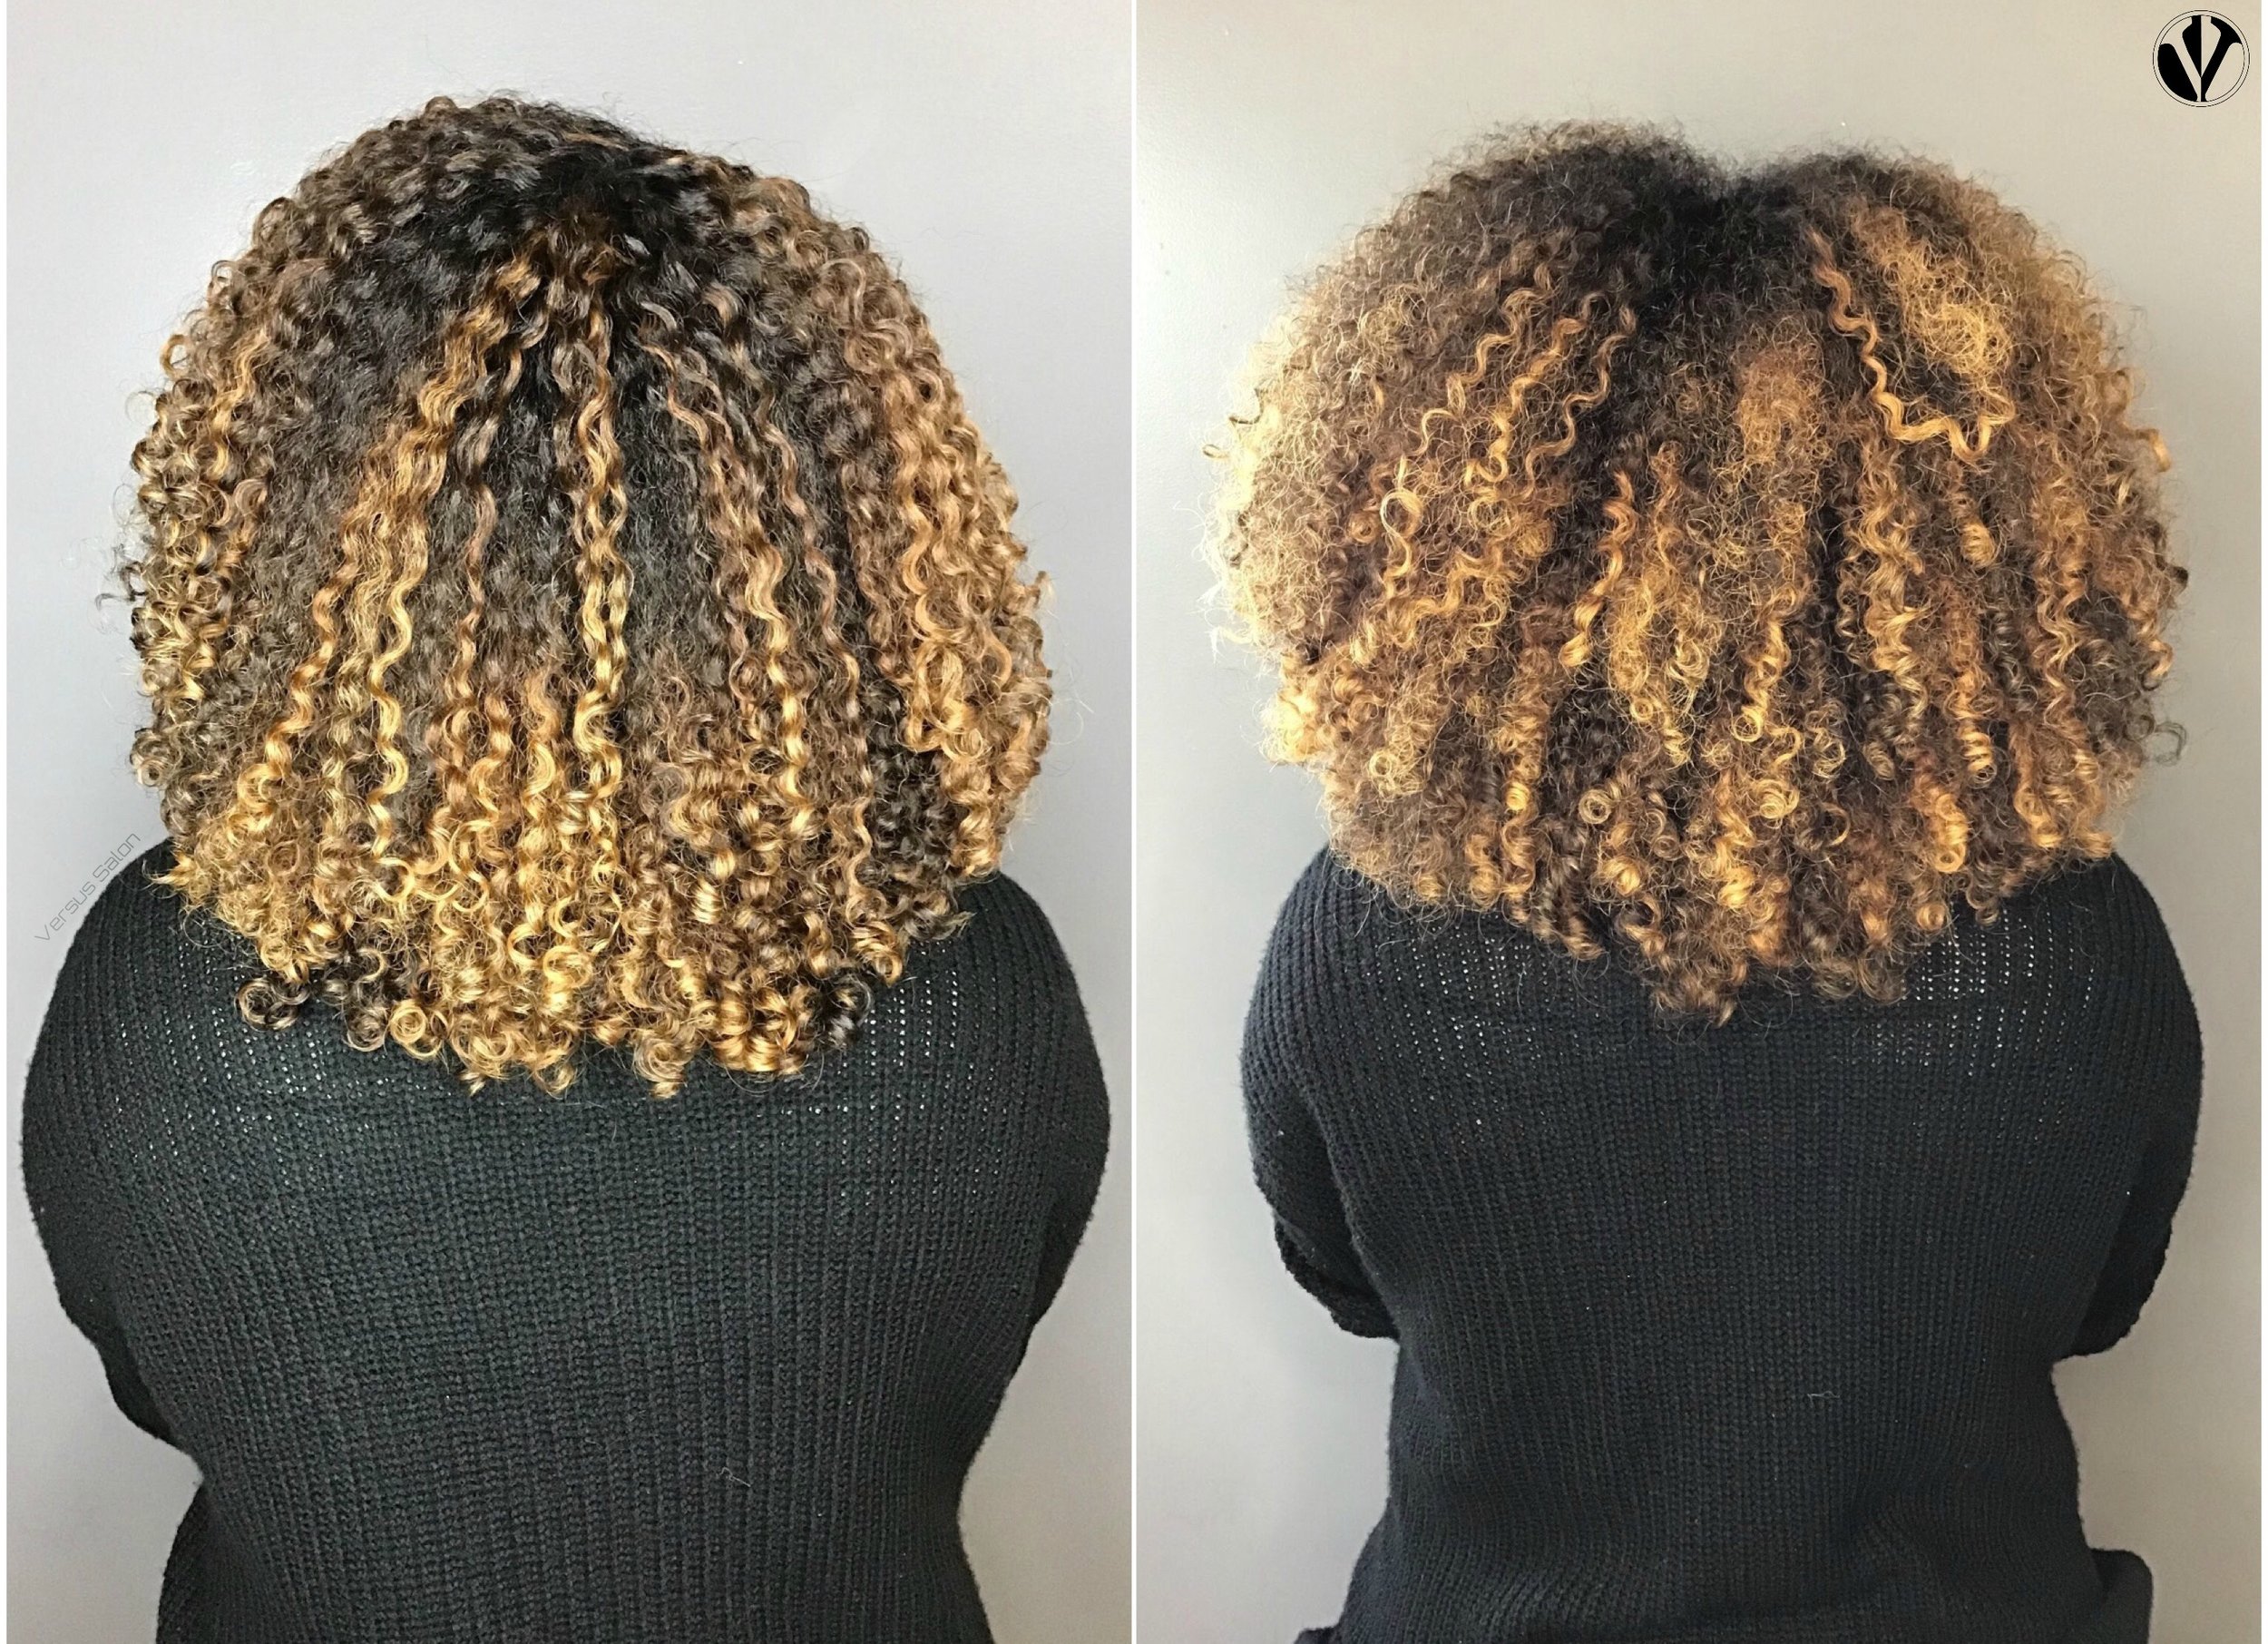 The Go-To Guide on Caring for High Porosity Hair